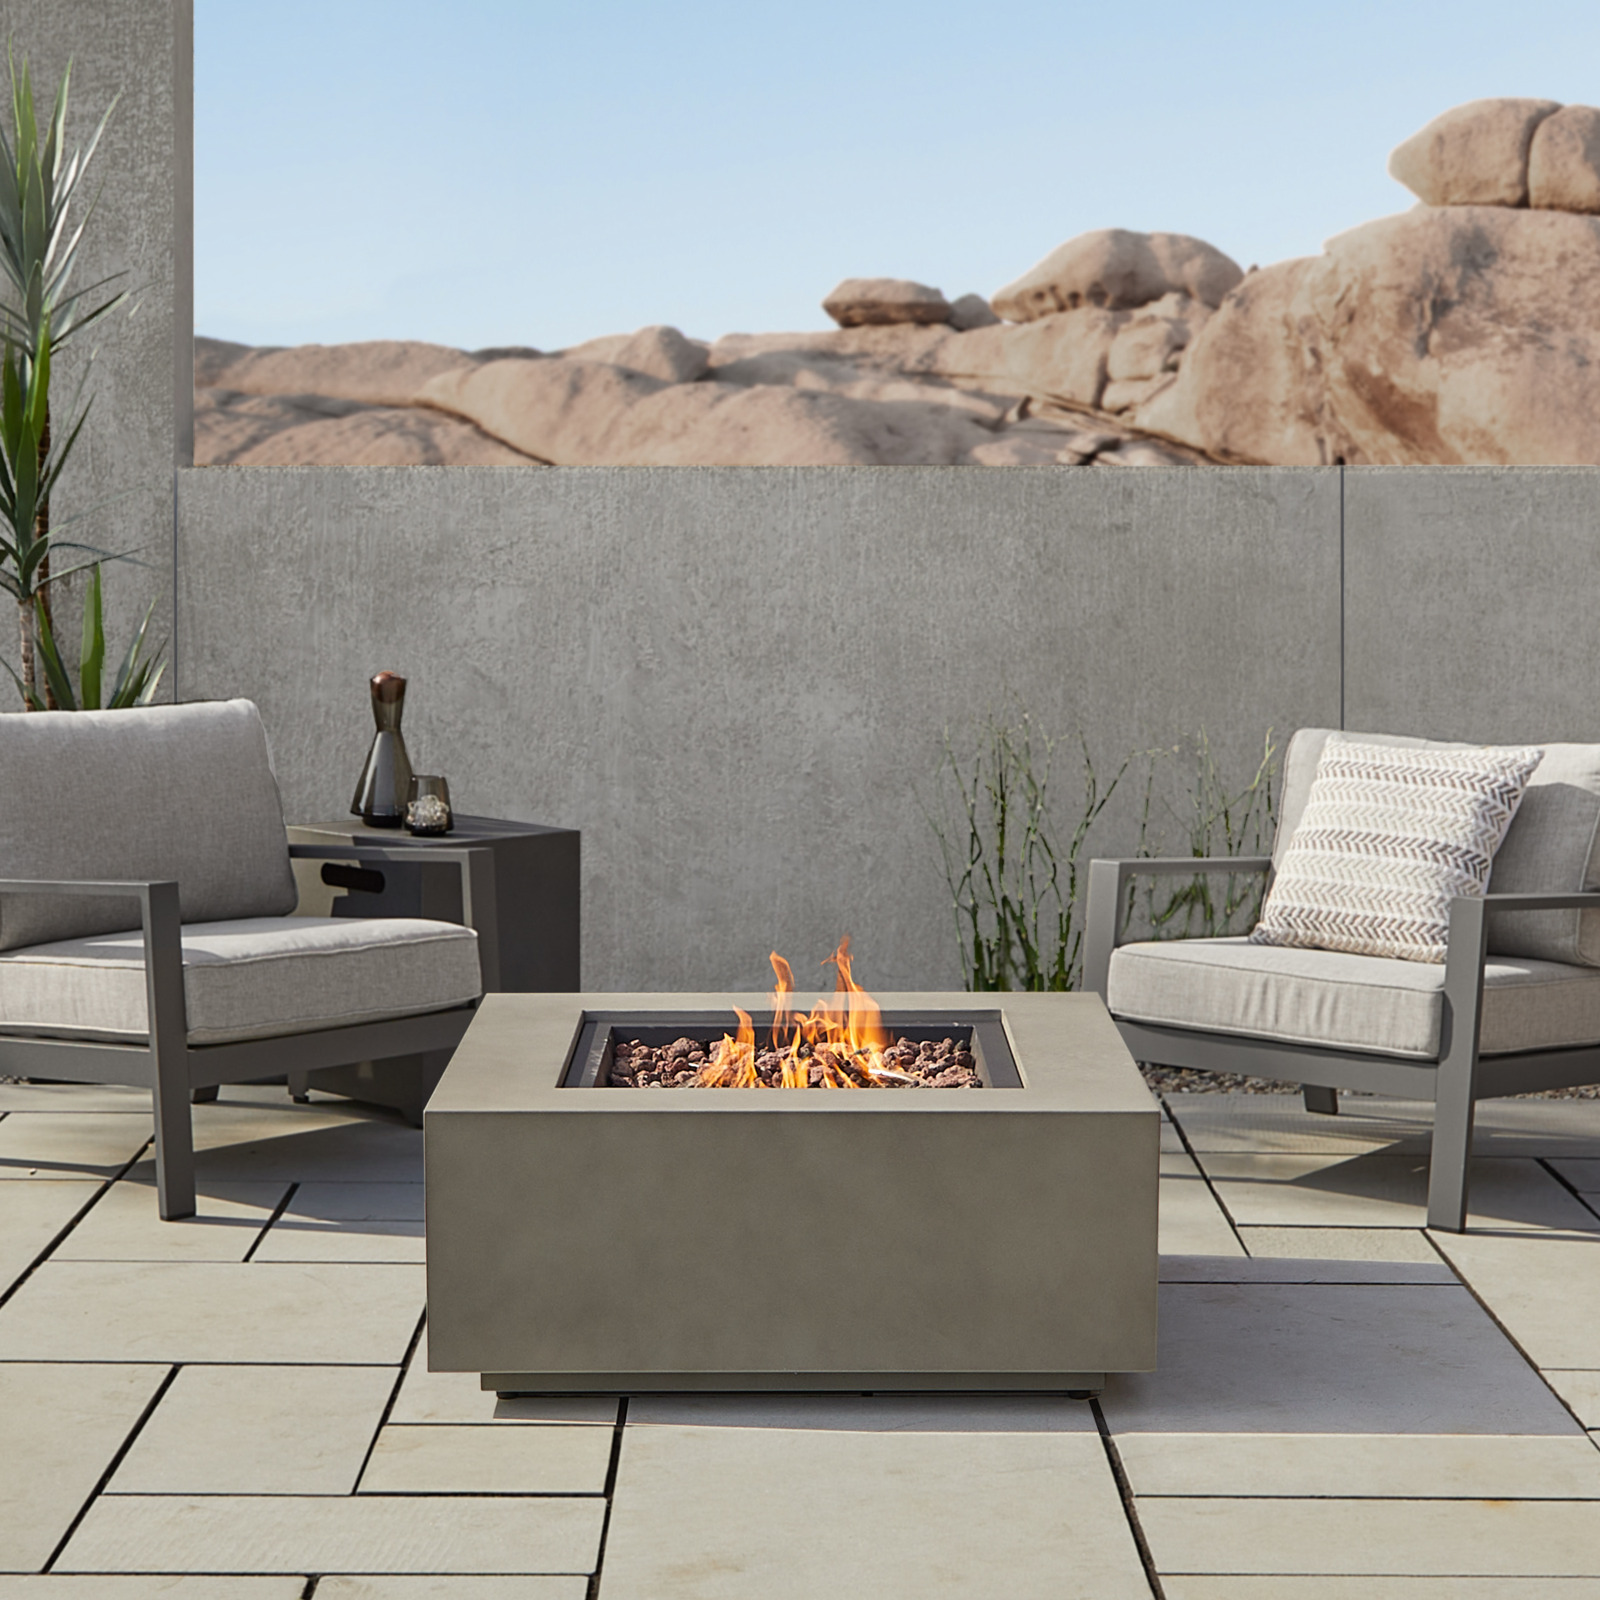 Aegean Square Propane Fire Pit Outdoor Fireplace Fire Table for Backyard or Patio